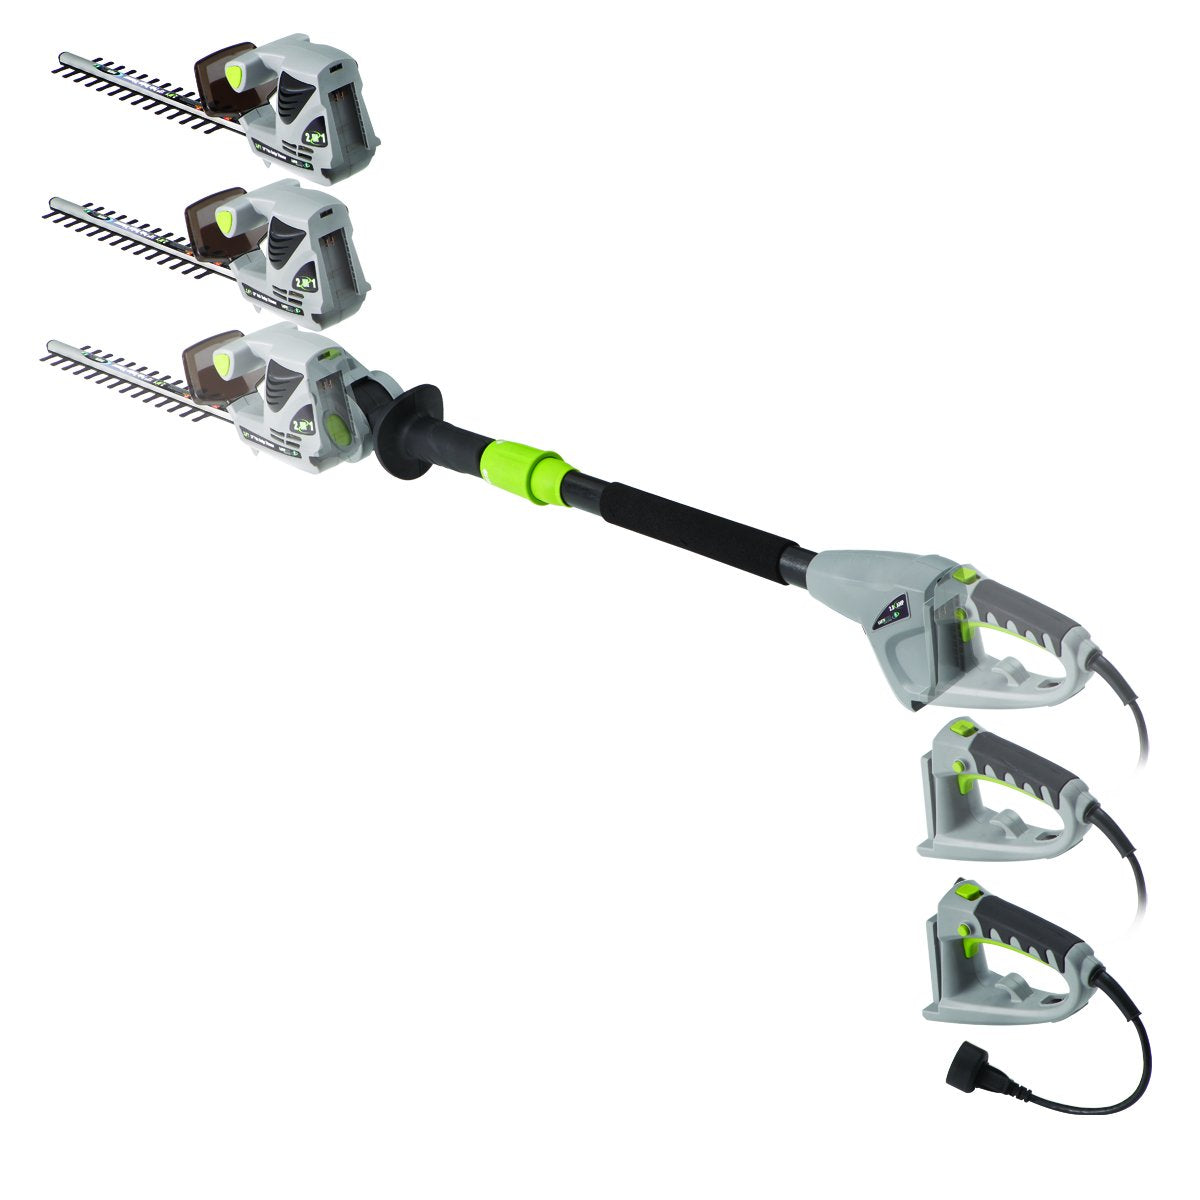 Earthwise Power Tools by ALM 18" 2.8-Amp 120V Corded 2 in 1 Hedge Trimmer